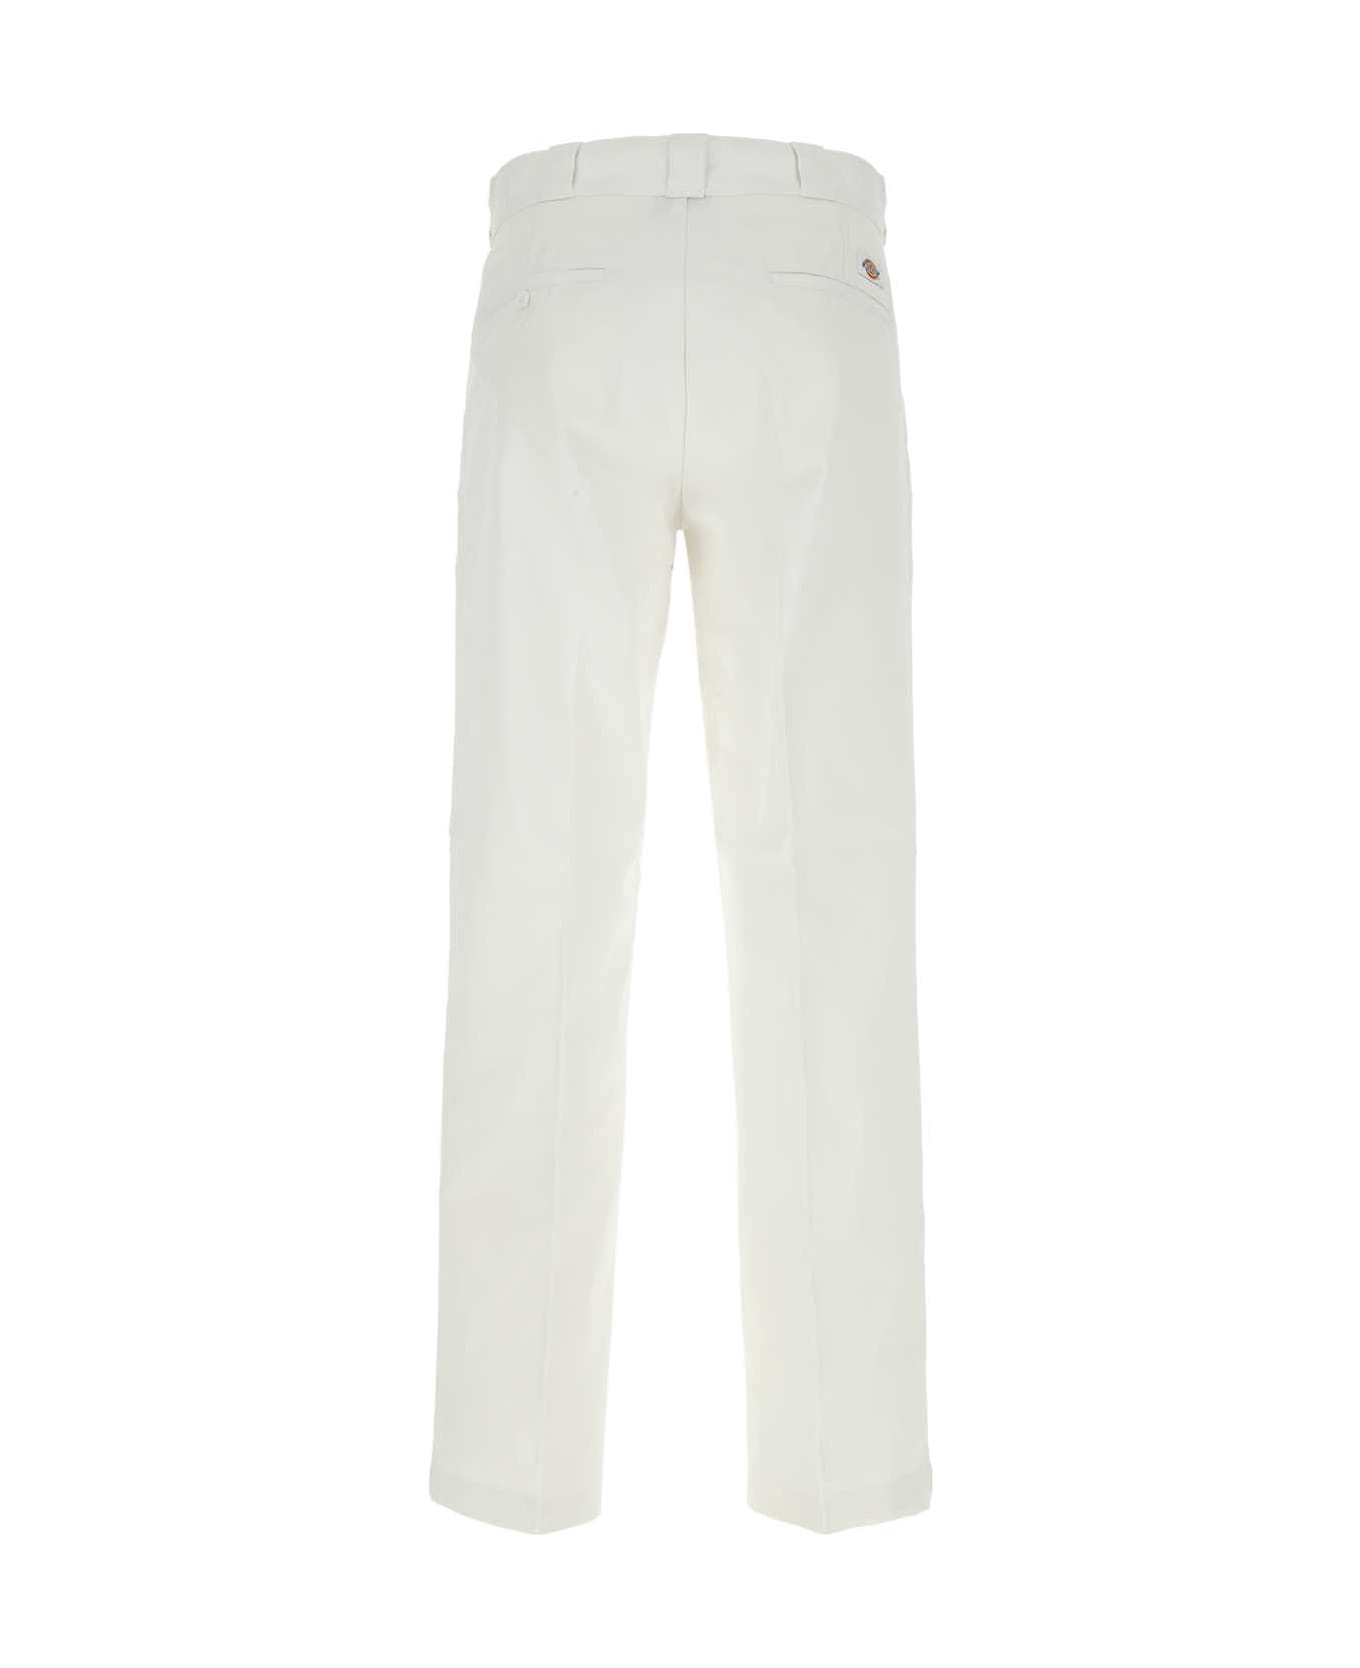 Dickies White Polyester Blend Pant - WHX1